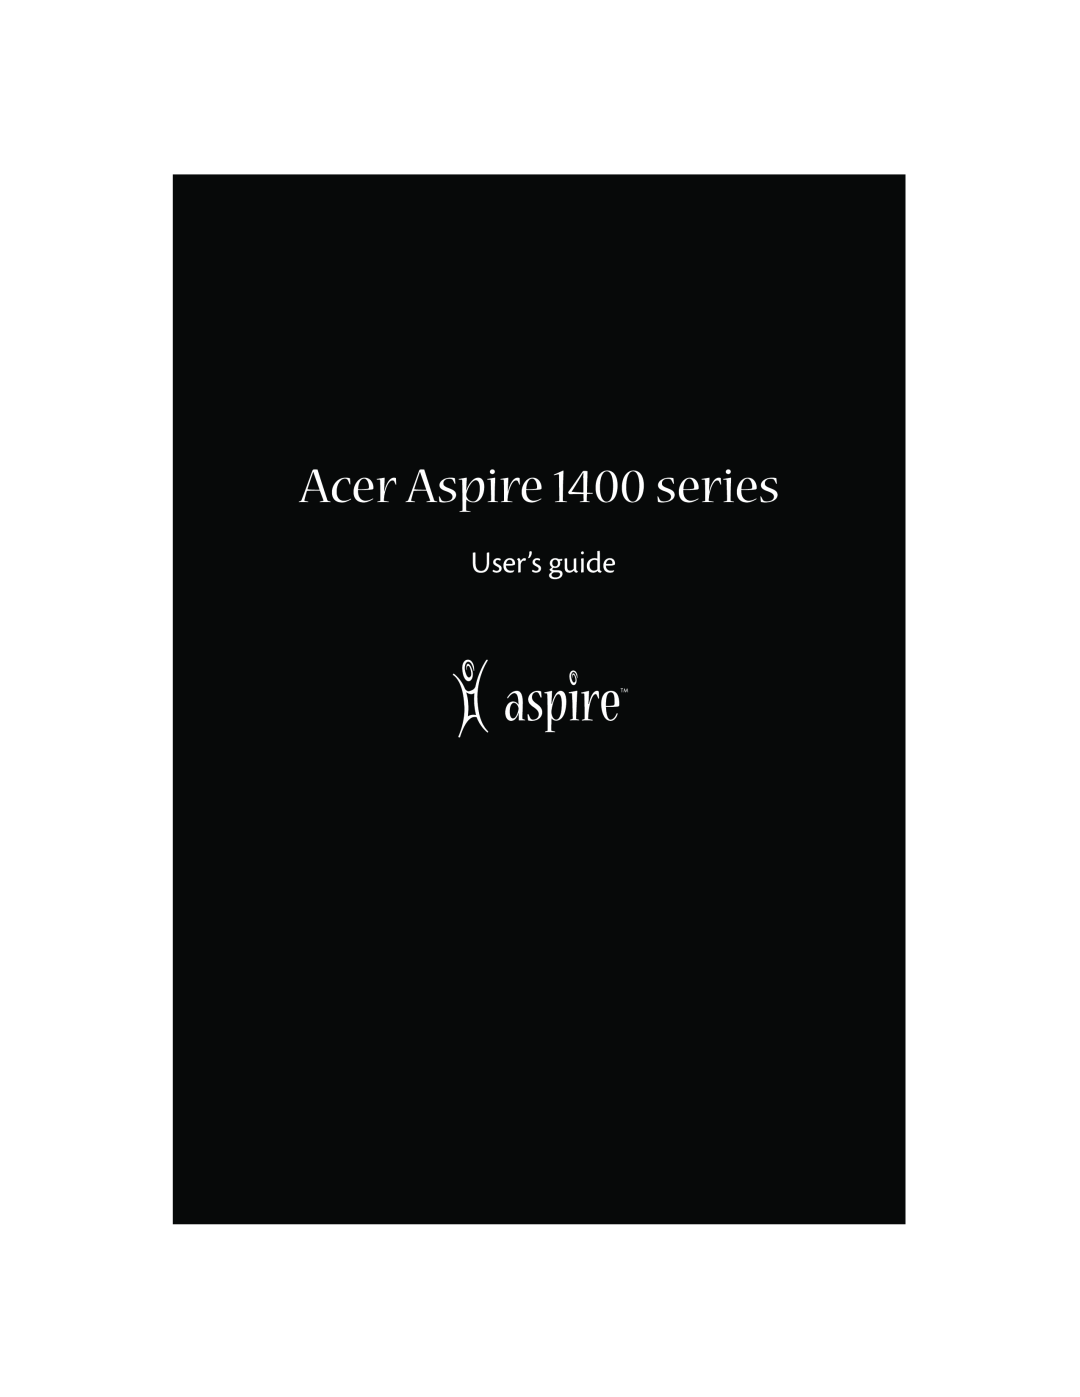 Acer manual Acer Aspire 1400 series, User’s guide 